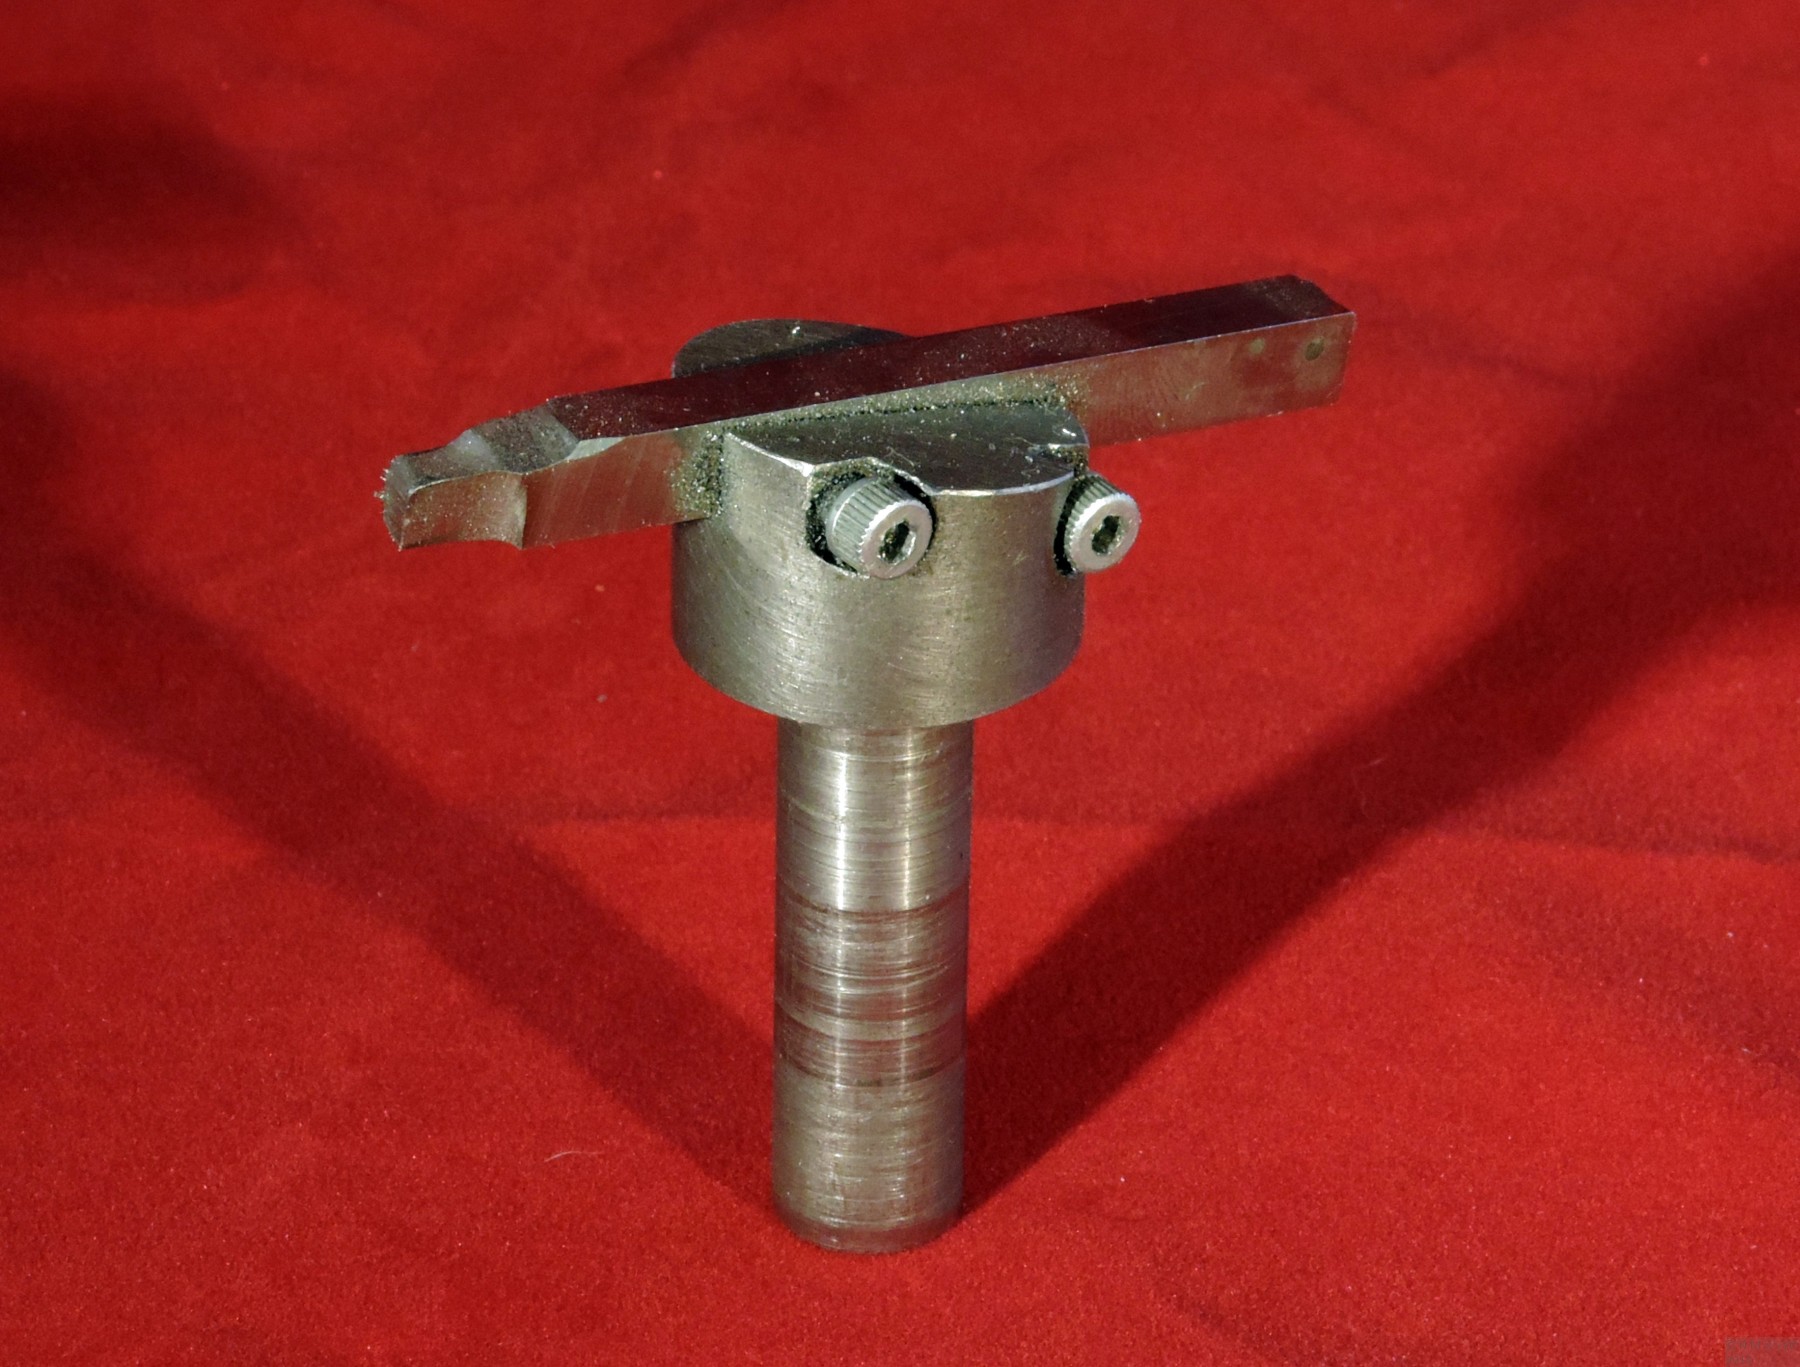 The finished fly cutter fitted with a toolbit